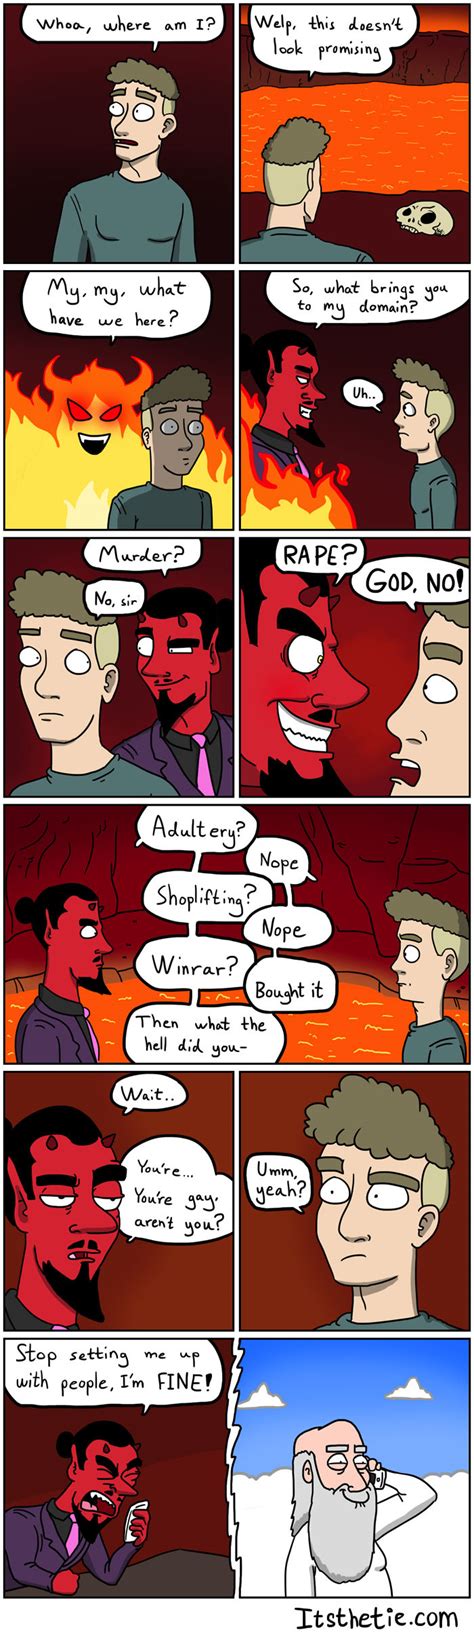 Fun New Comic Strip Asks Why Gay Men Really Go To Hell